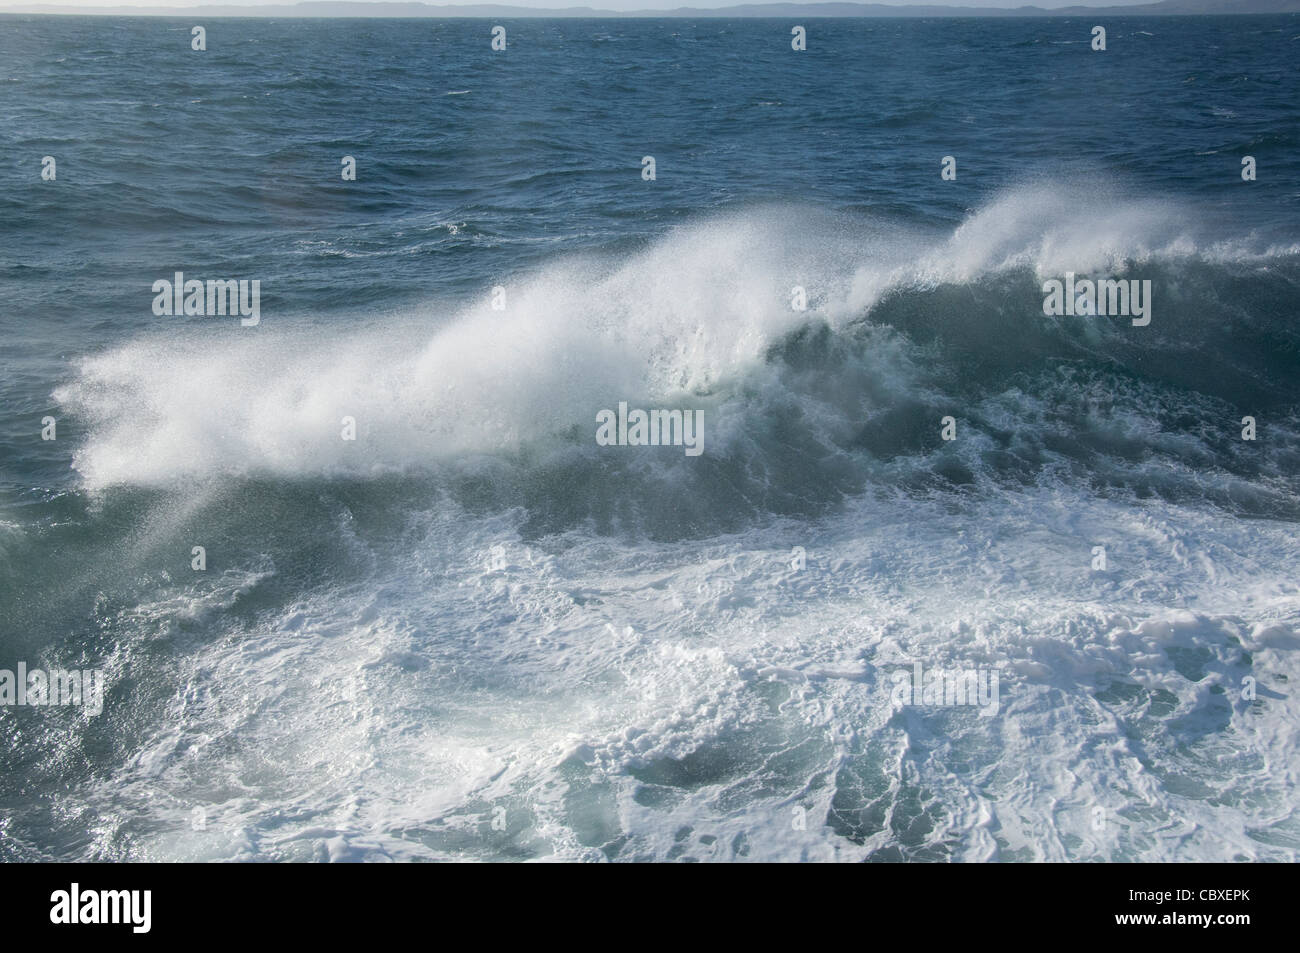 Scotland, North Atlantic ocean off the island of Mull. High seas and winds. Stock Photo